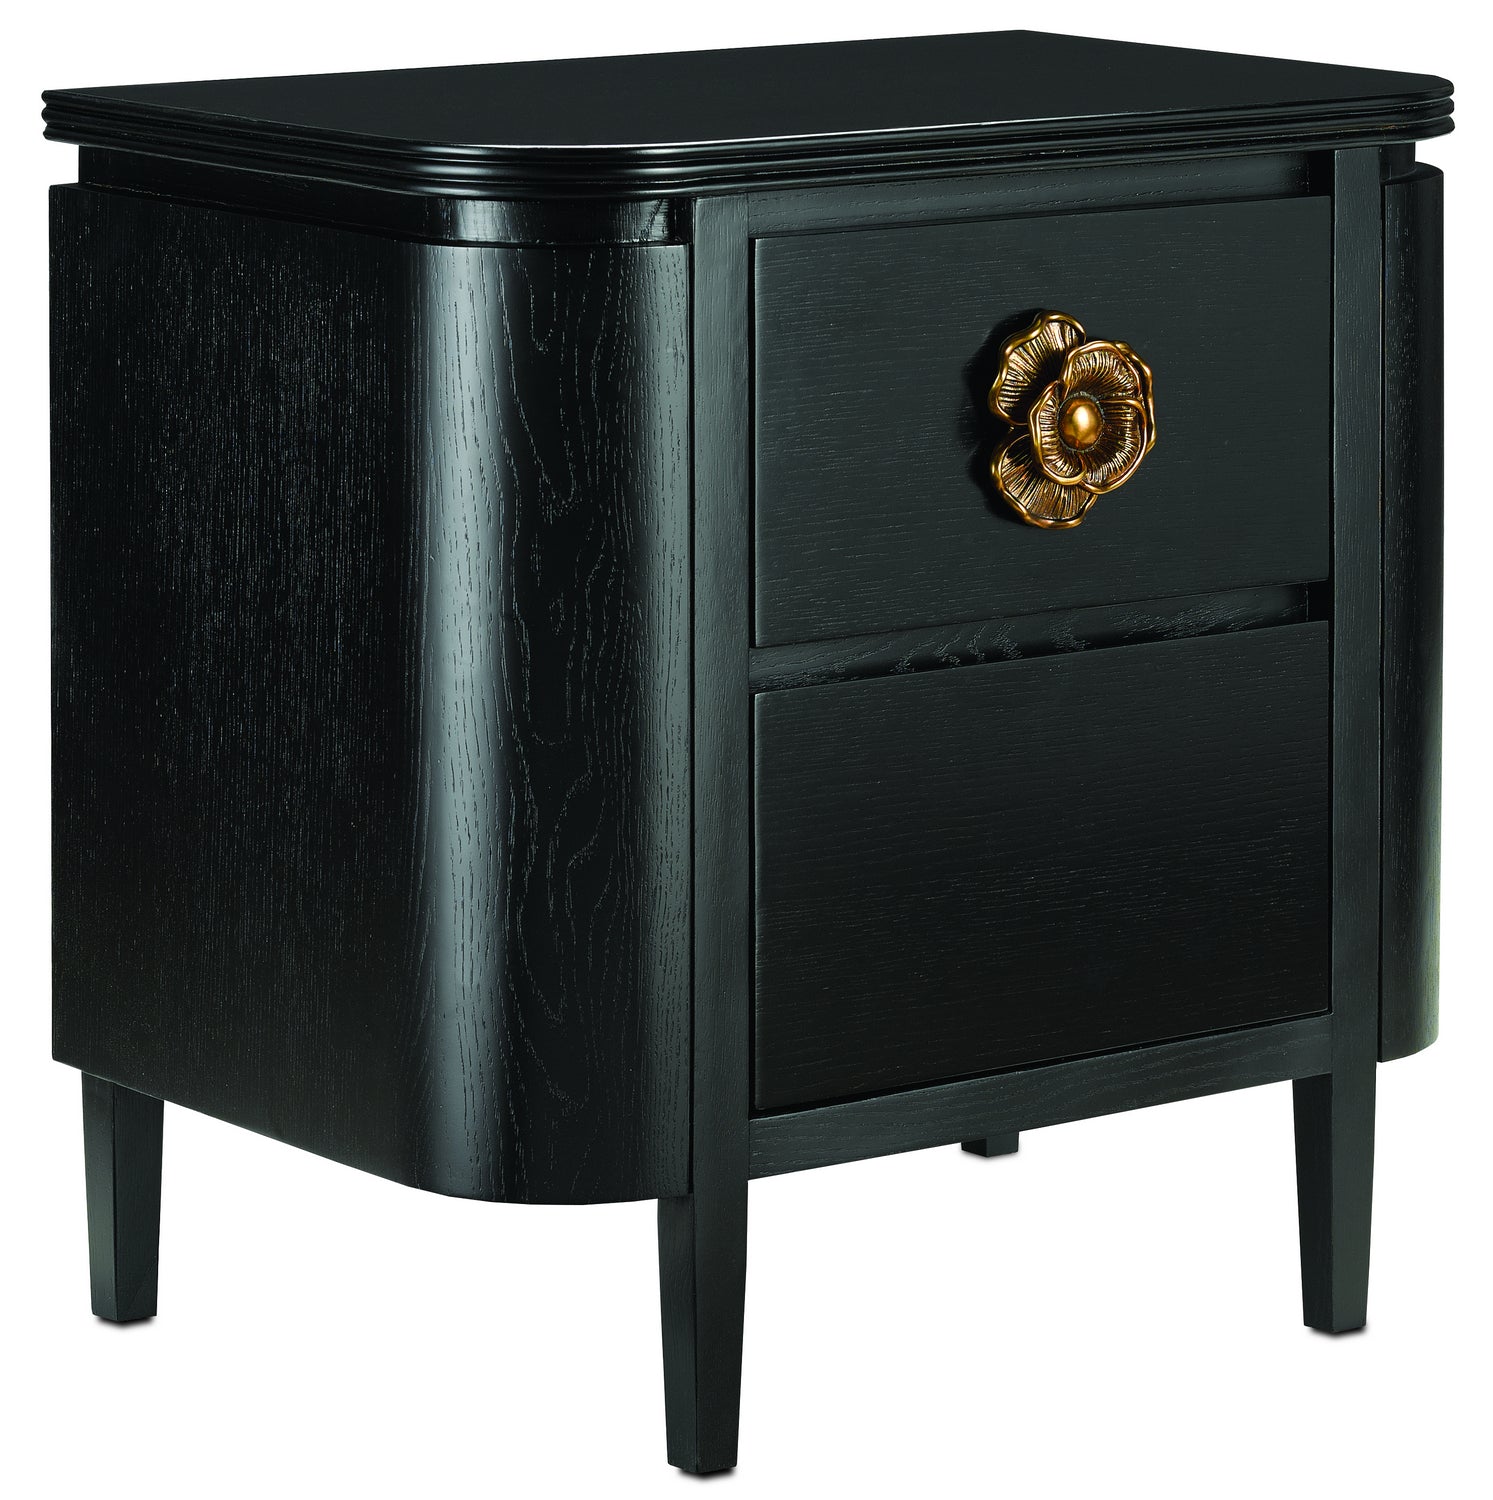 Nightstand from the Briallen collection in Caviar Black/Antique Brass finish